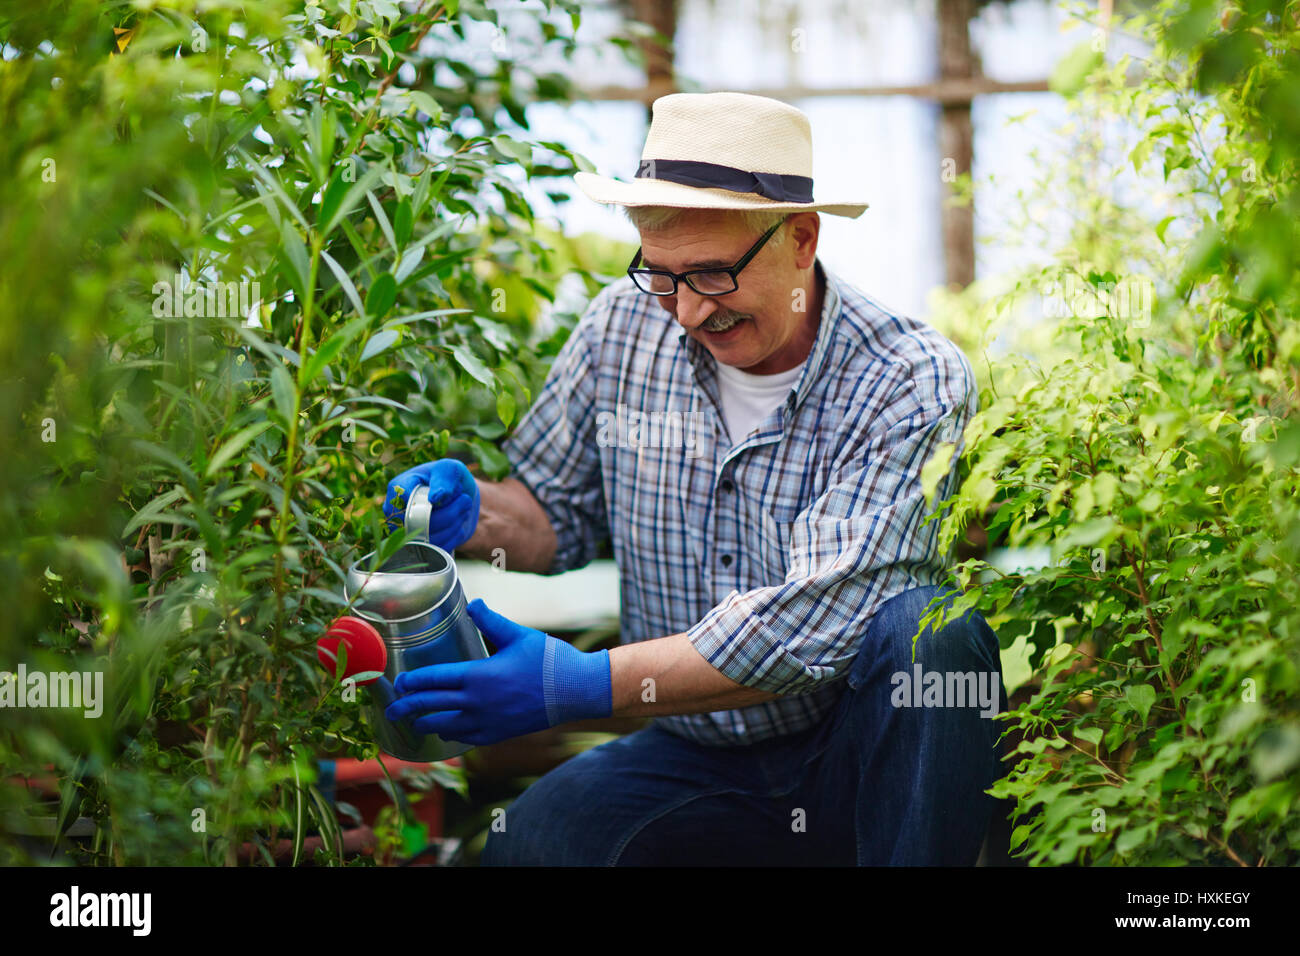 Senior Man Taking Care of Plants in Greenhouse Stock Photo